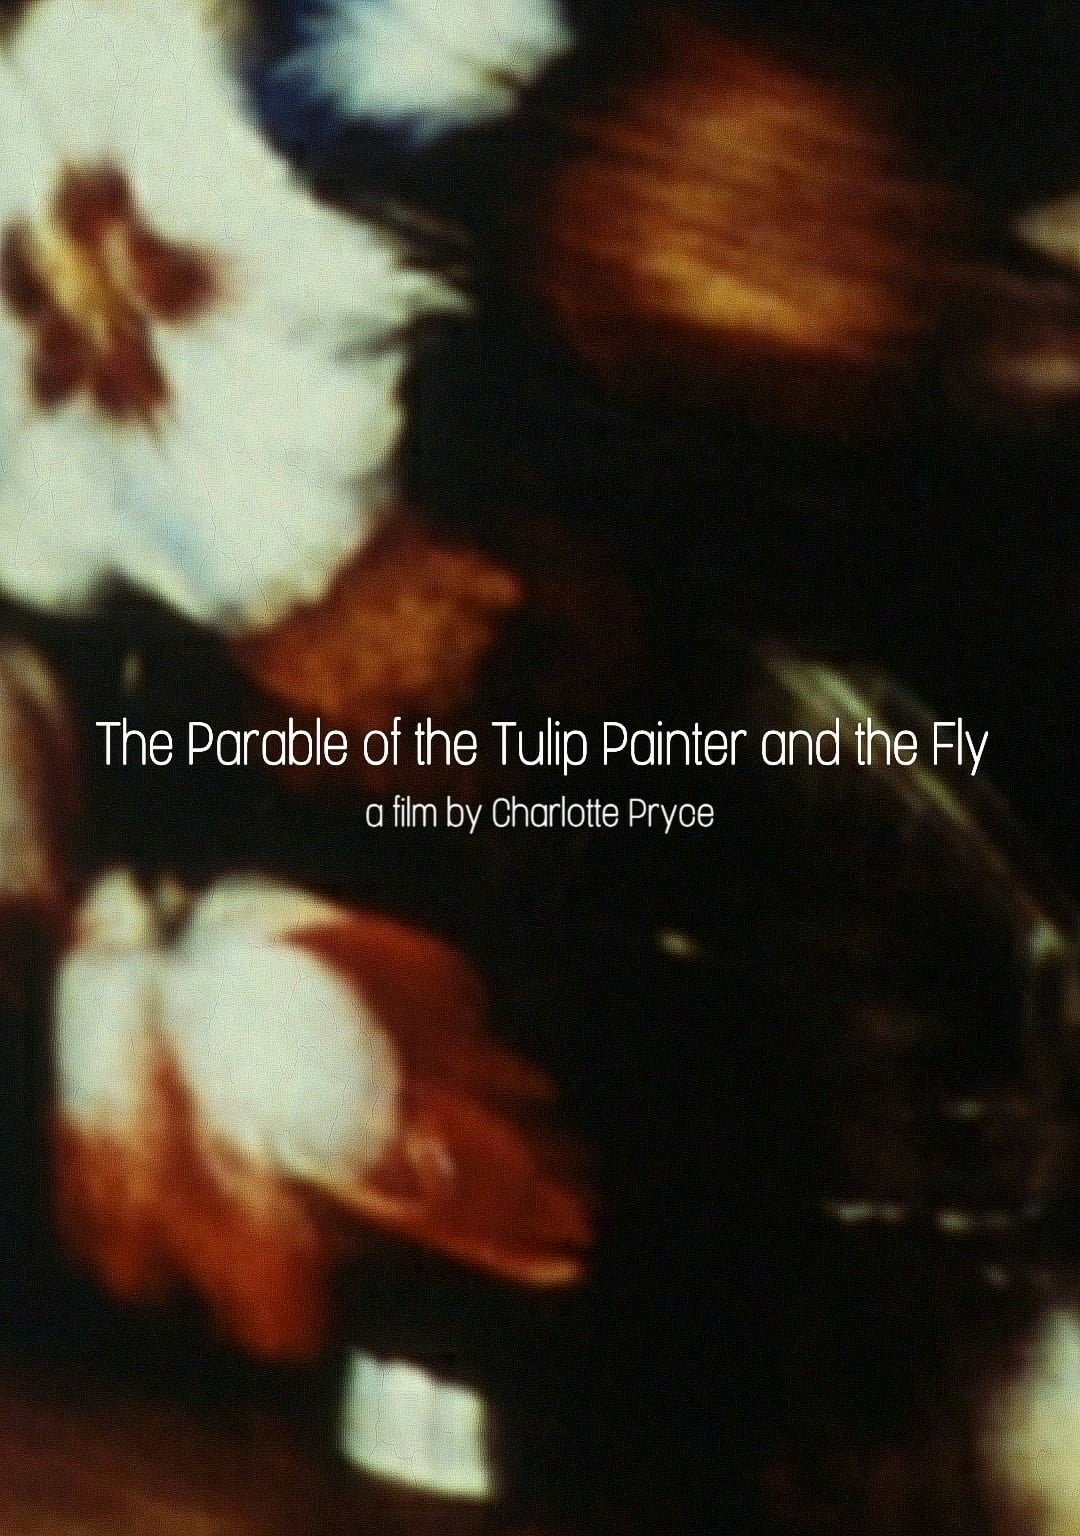 The Parable of the Tulip Painter and the Fly